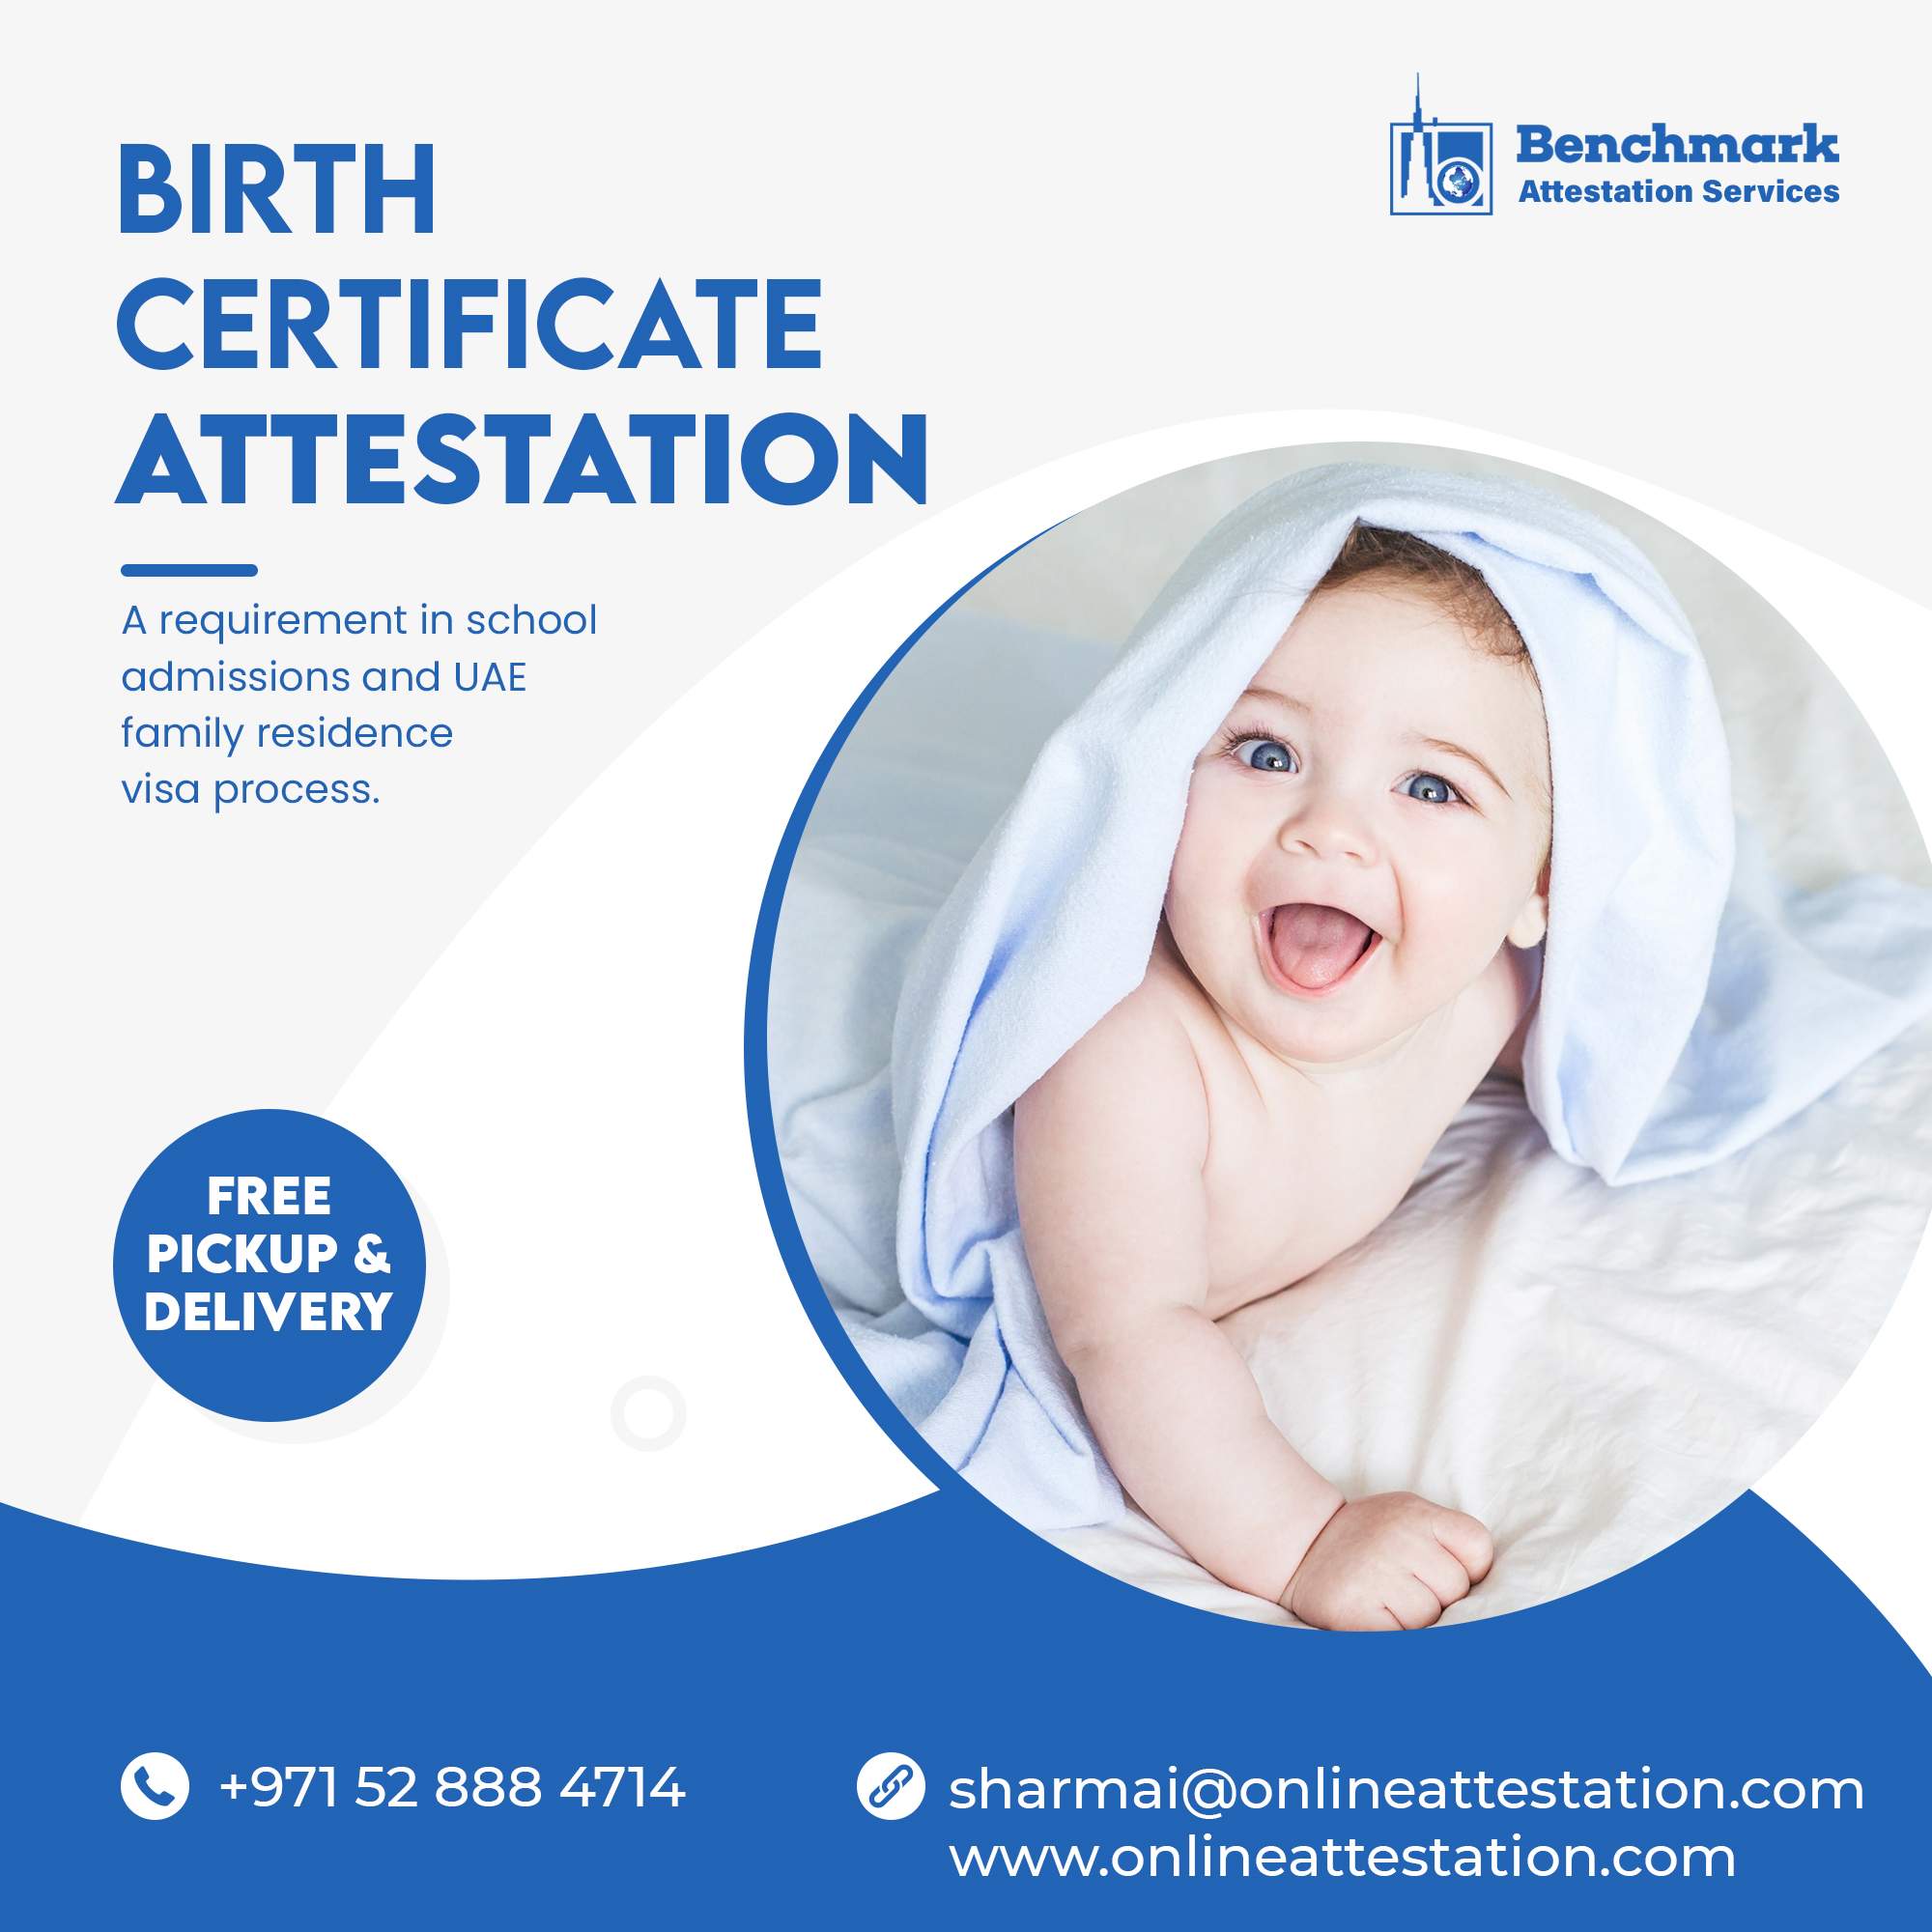 how-to-get-a-birth-certificate-attestation-in-uae-atoallinks